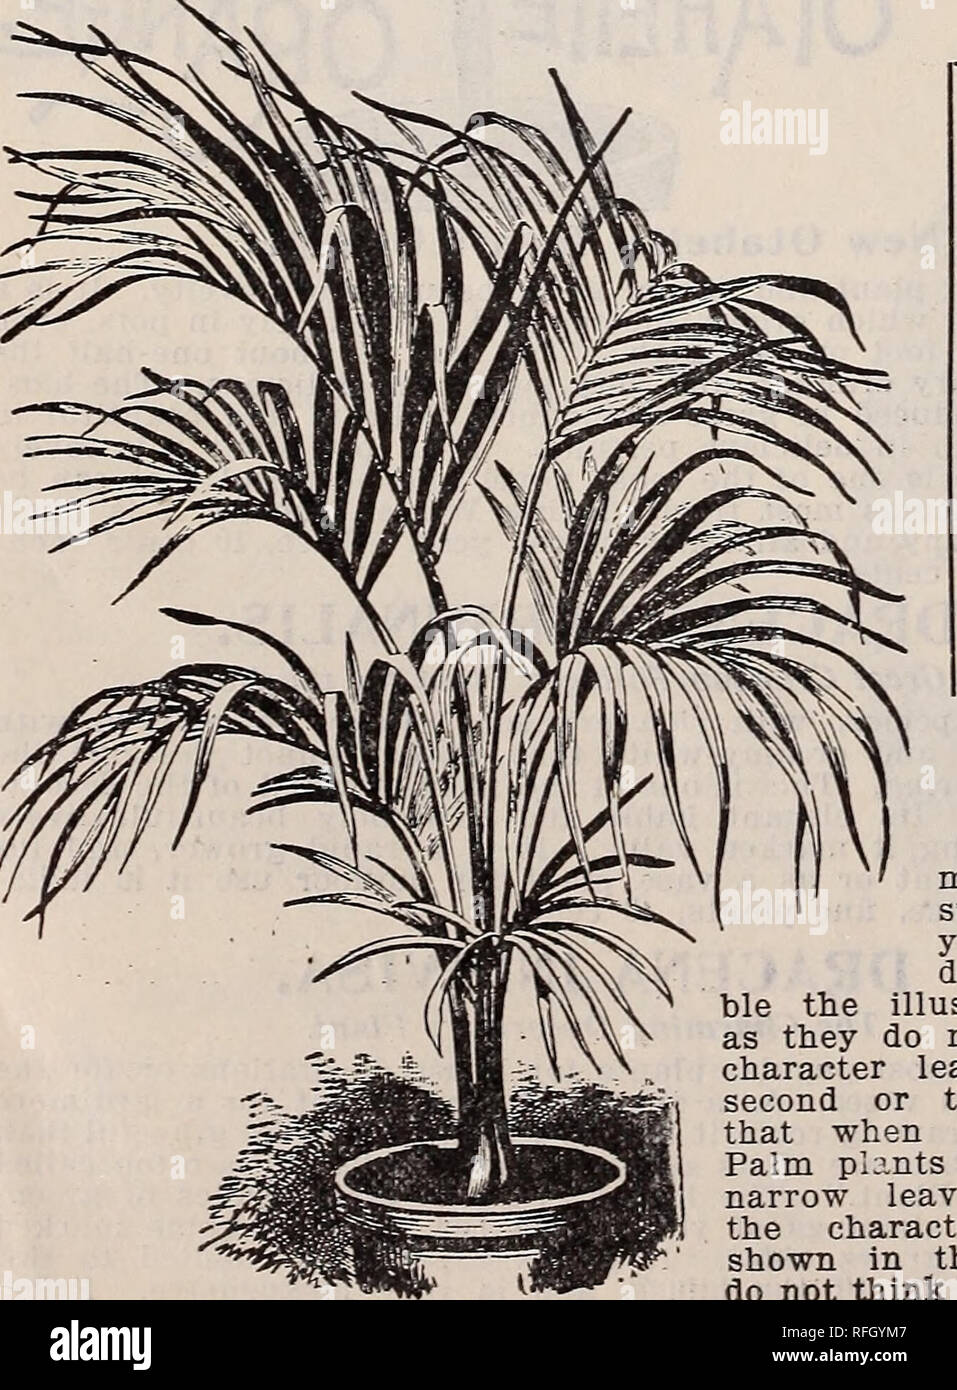 . Floral gems for winter flowering. Nurseries (Horticulture) Ohio Springfield Catalogs; Plants, Ornamental Catalogs; Flowers Catalogs; Bulbs (Plants) Catalogs. FICUS ELASTICA—RUBBER PLANT. Latania Barbonica—Leaves large, fan-shaped, of a very cheerful green color; plant of hardy constitution, and adapted to all decorative purposes, within or without doors; appreciated by all the plant-loving community. The cut shows a healthy plant of about four years old. Nice young plants, 15 cents each; larger plants, 25 cents, 50 cents and ll.OO each; extra size, two to three feet, $2.00. Cocos Weddelliana Stock Photo